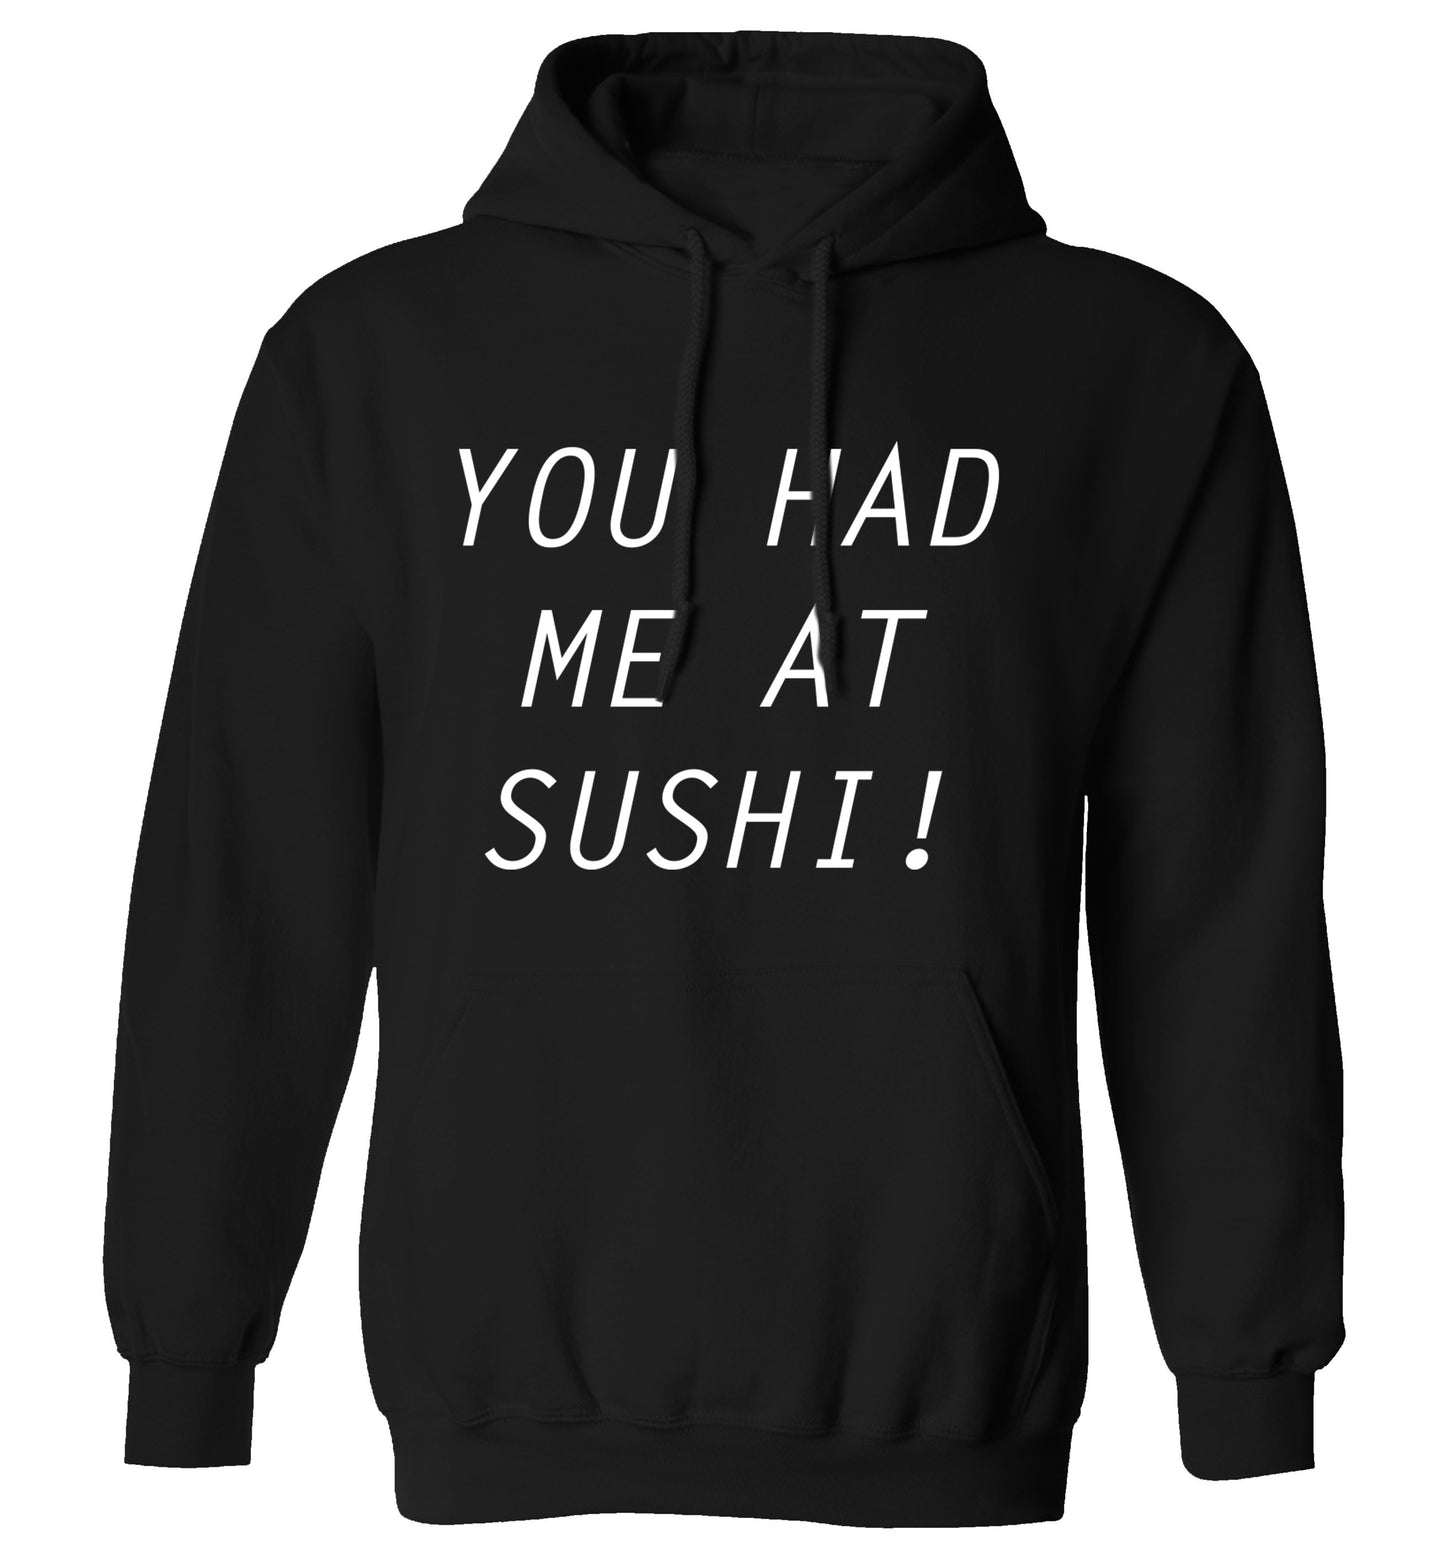 You had me at sushi adults unisex black hoodie 2XL